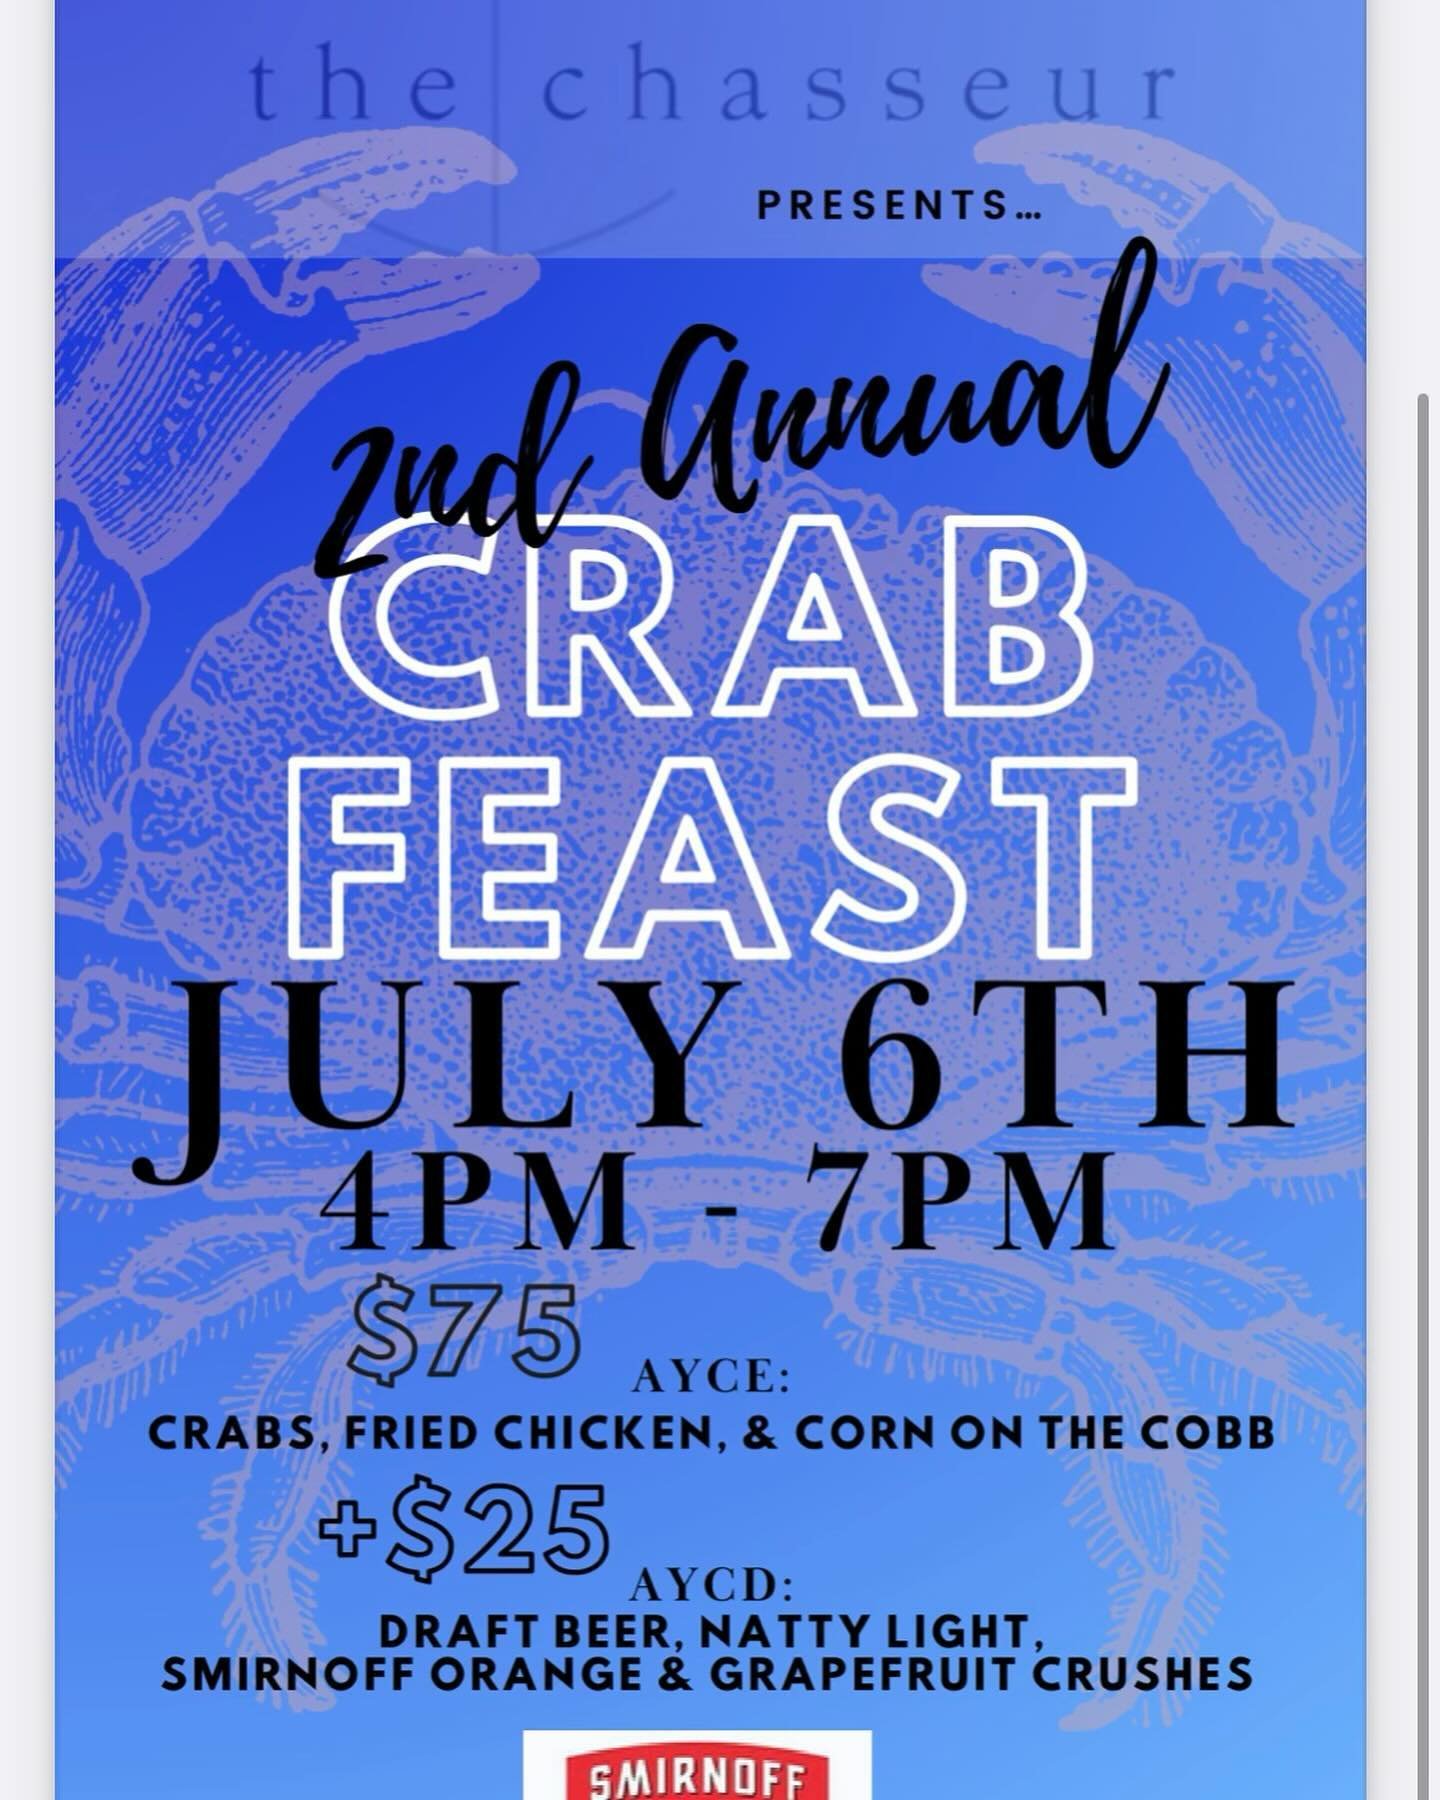 Join the Chassuer for our second annual crab feast from 4-7 pm for $75 enjoy all you can eat steamed crabs, fried chicken and corn on the cob.&nbsp;&nbsp;For an additional $25 enjoy bottomless Smirnoff orange and grapefruit crushes and domestic can a